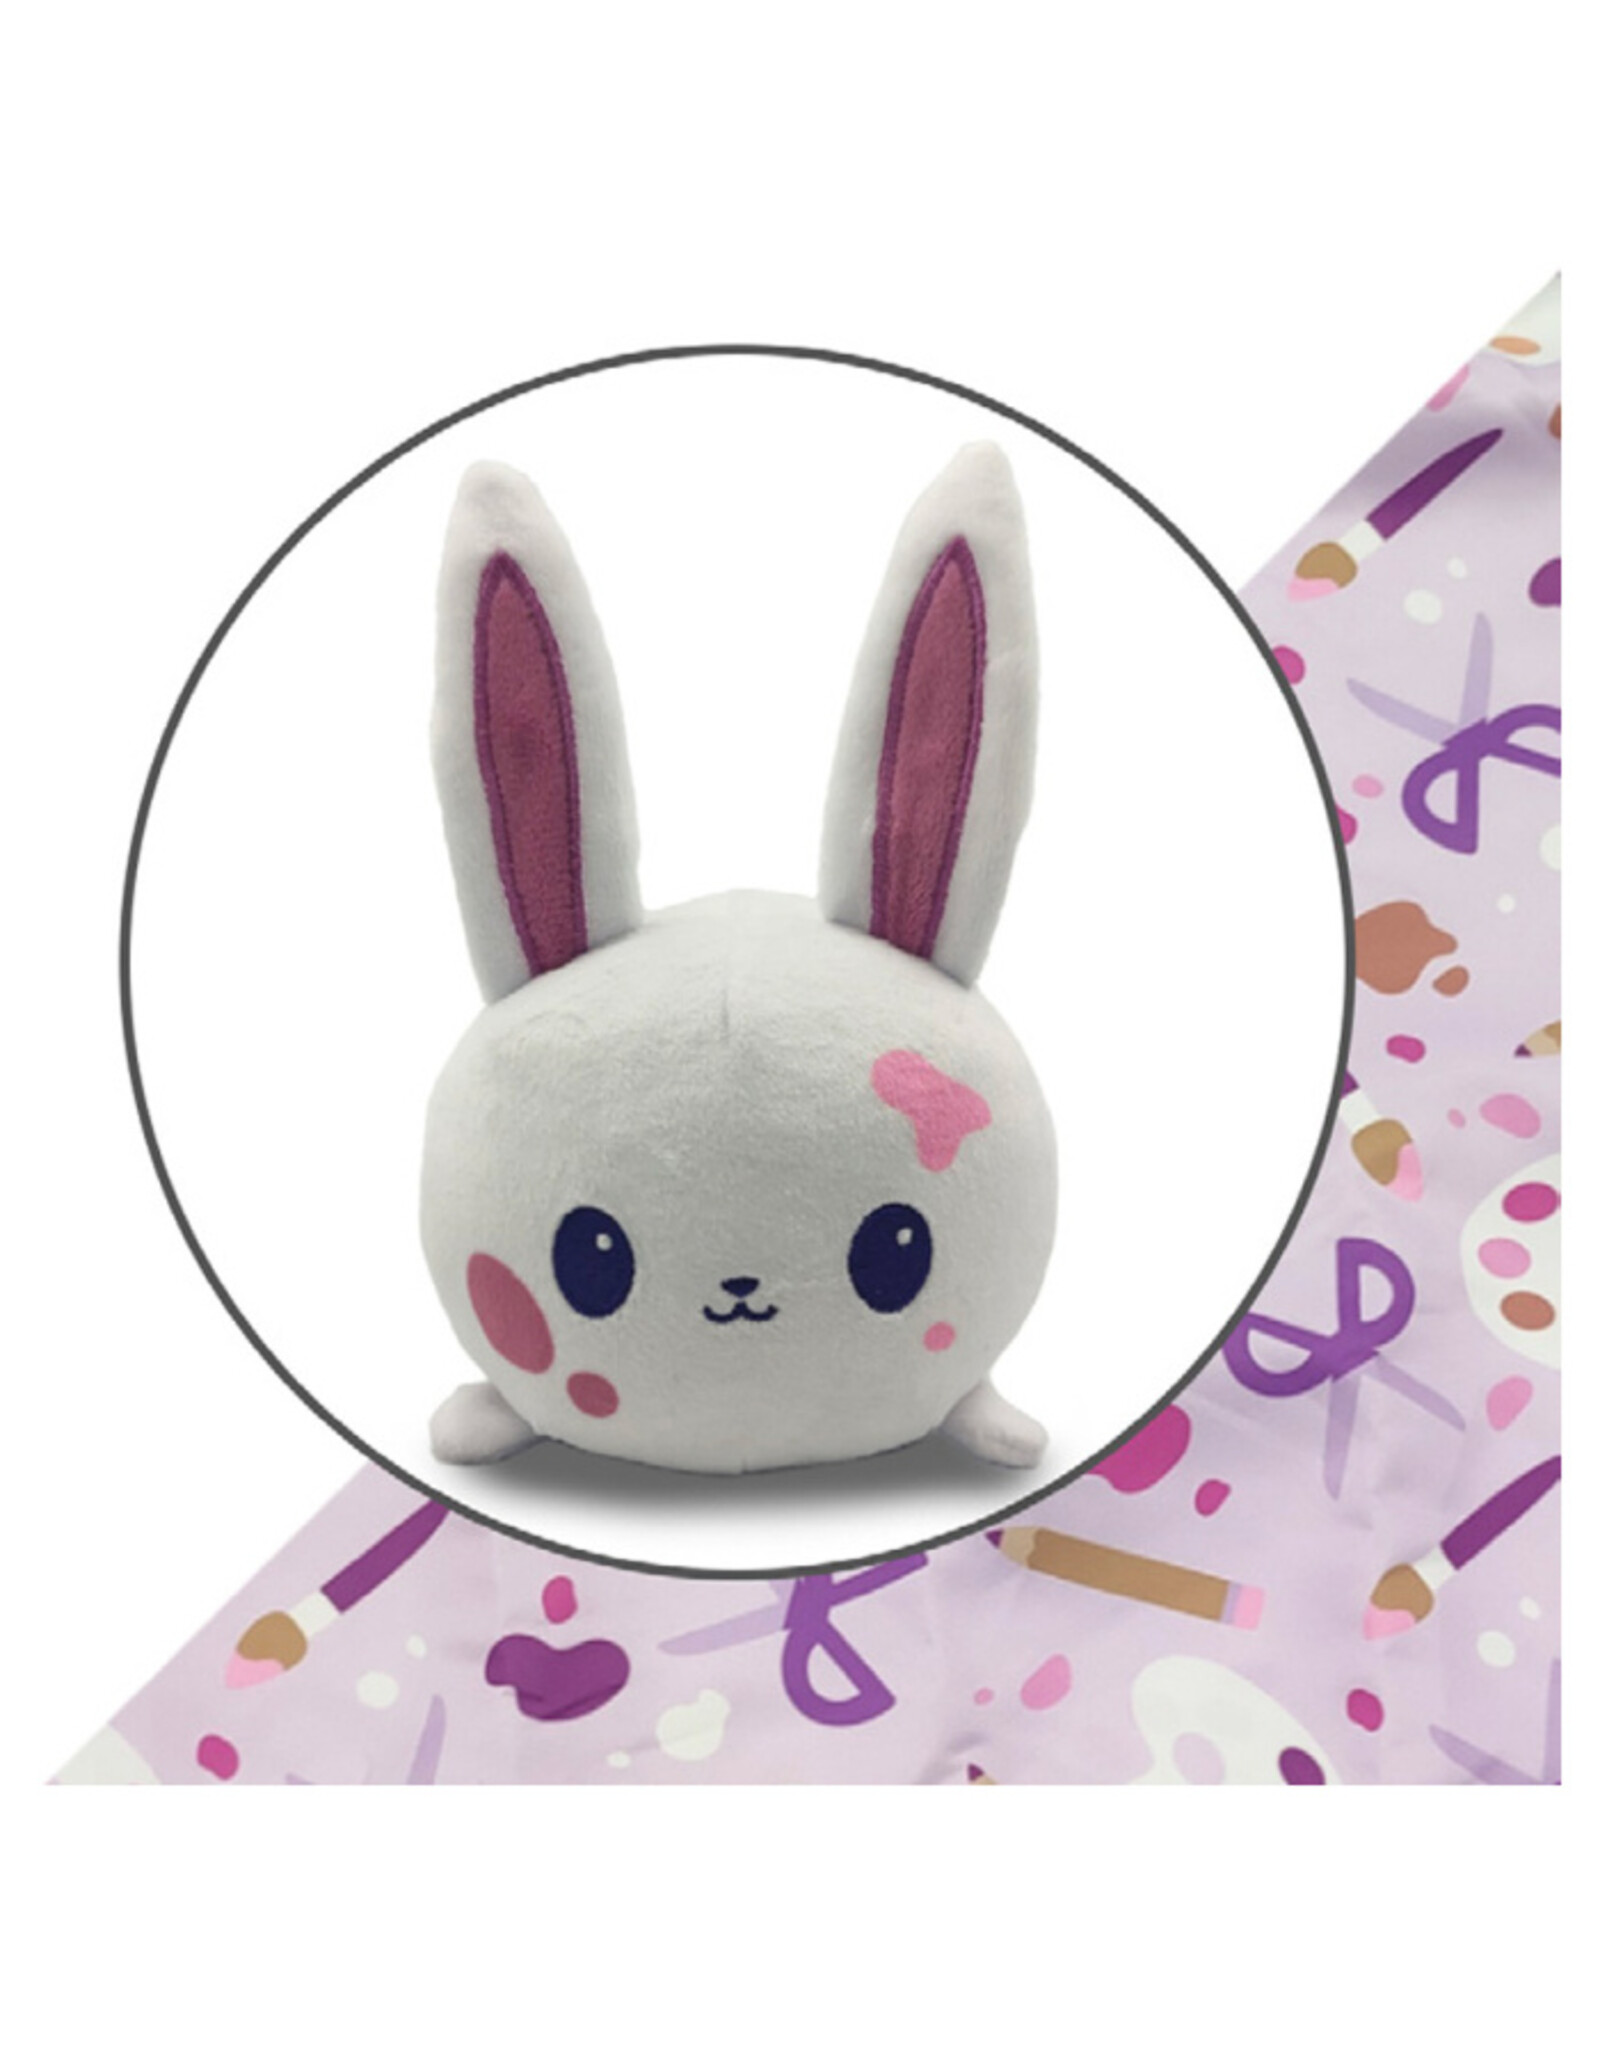 Tee Turtle Plushie Tote: WH Crafting Bunny